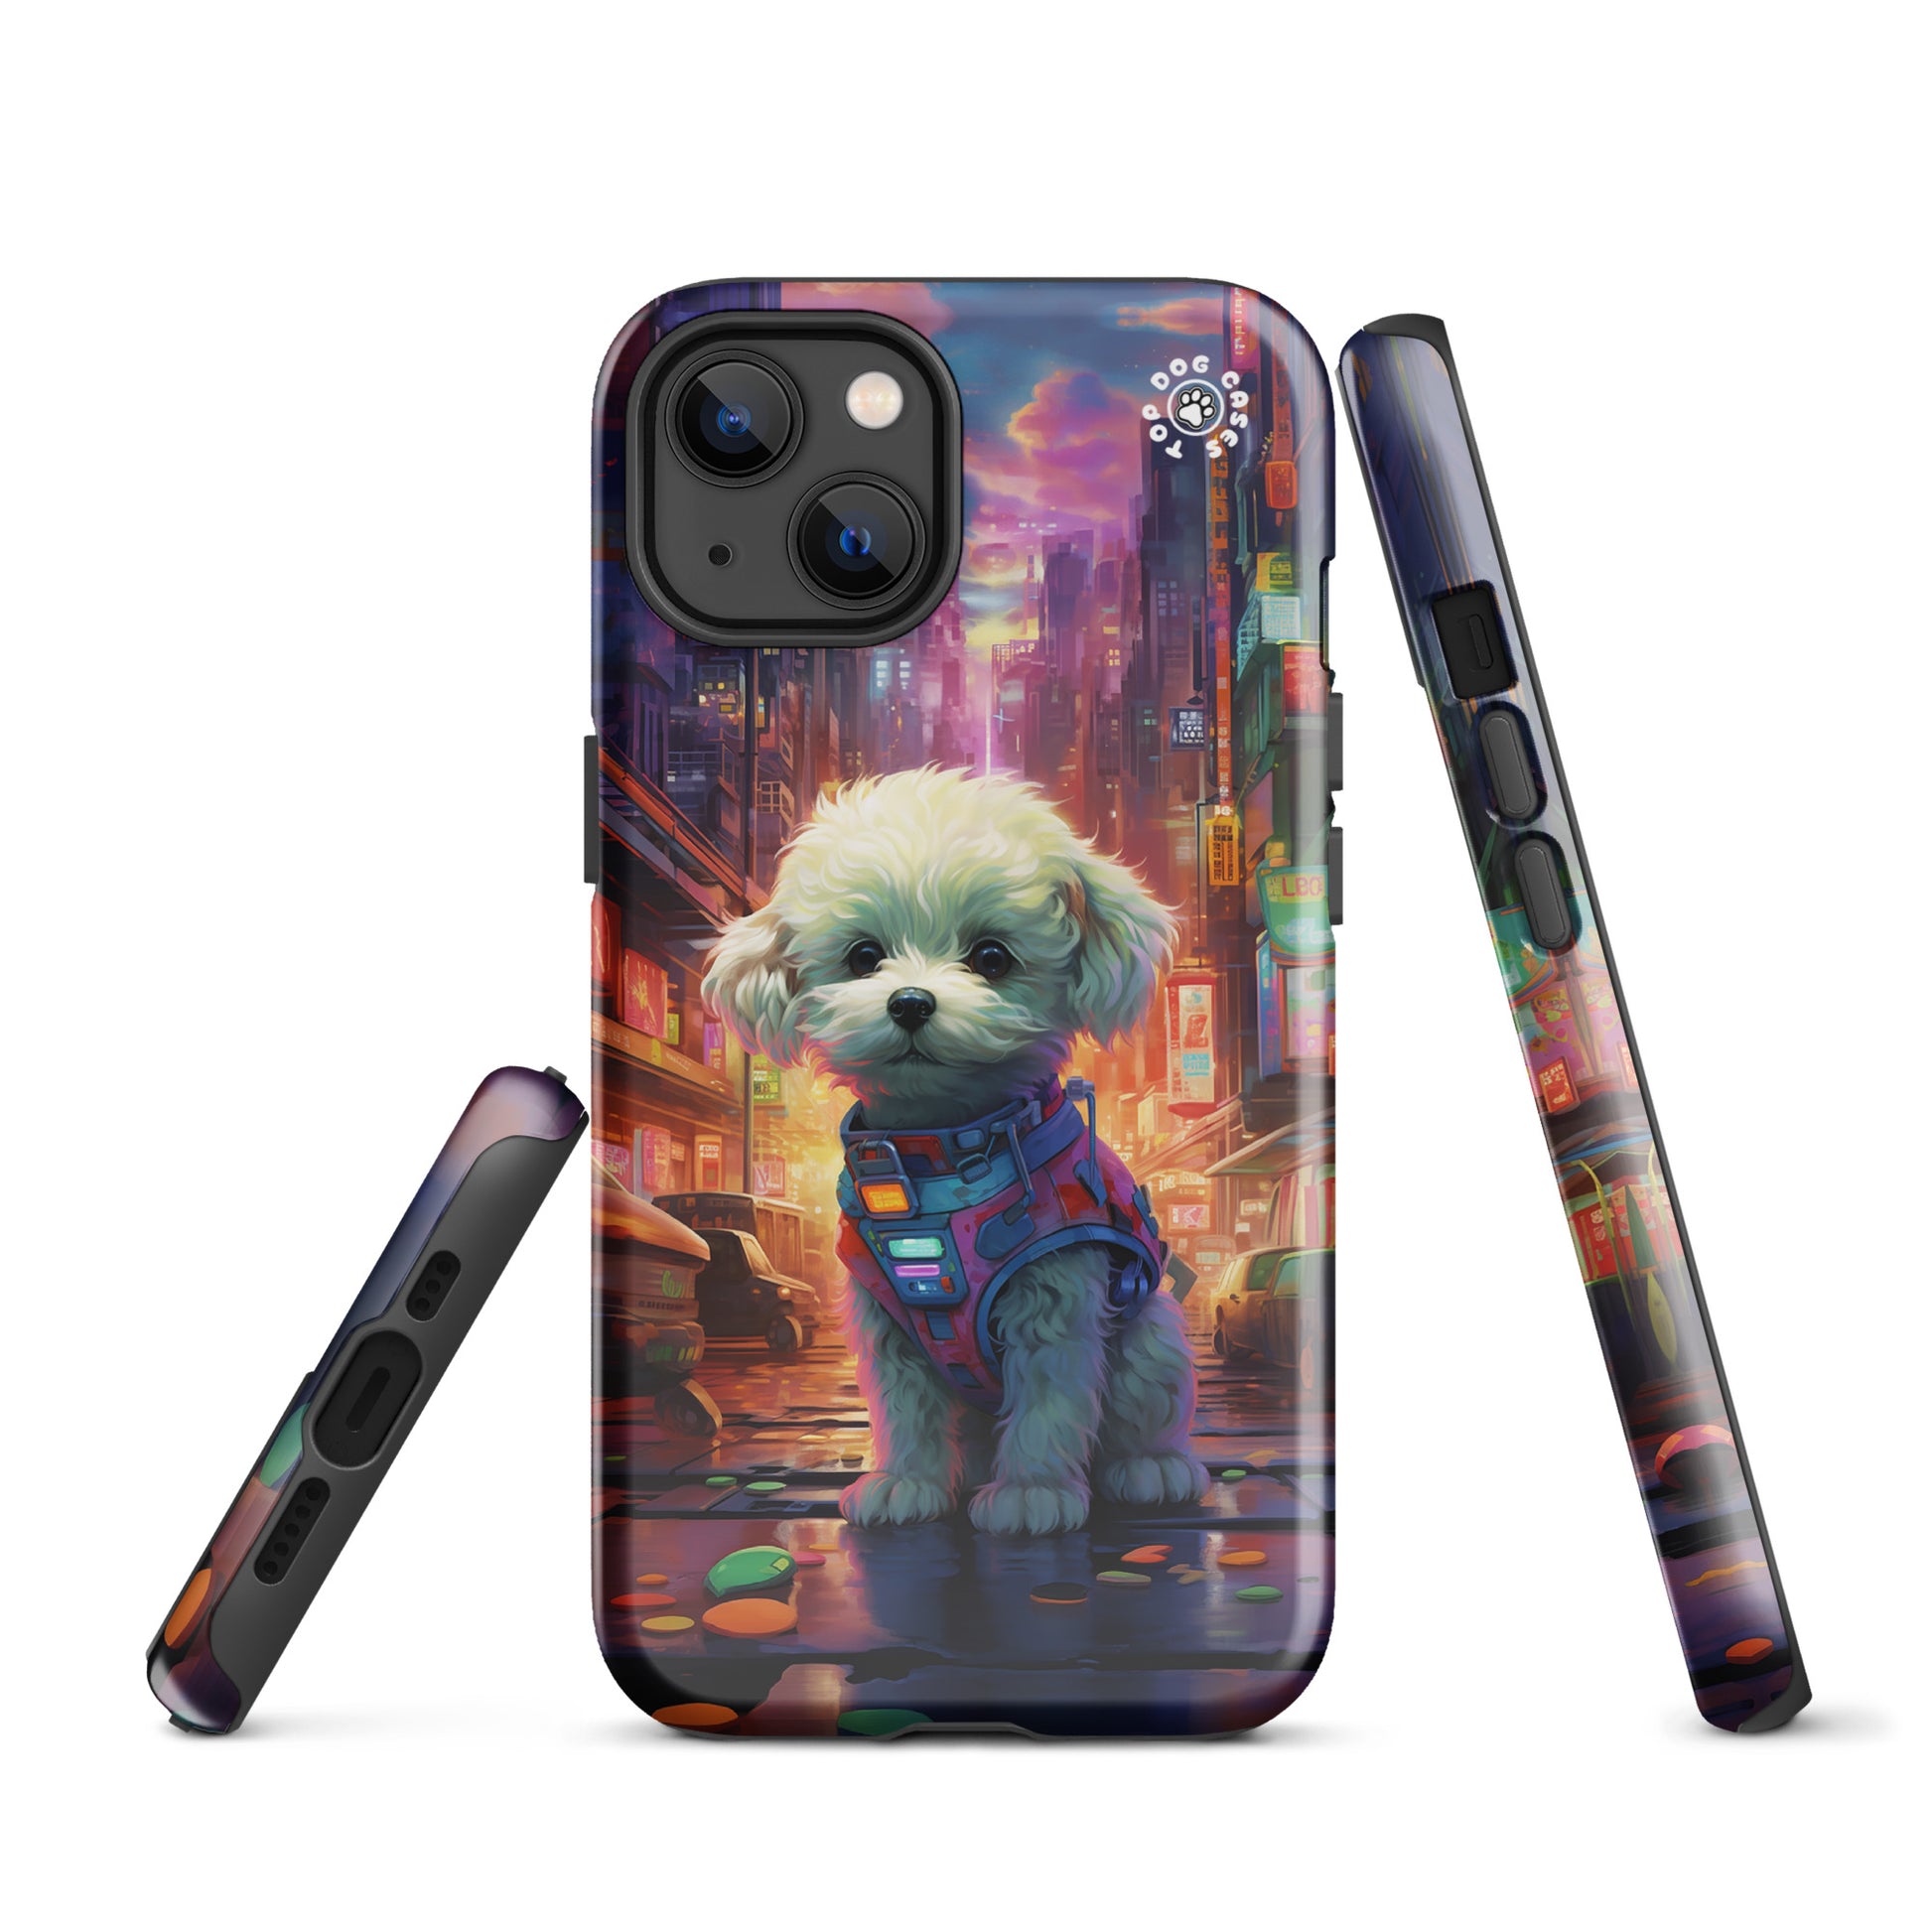 Toy Poodle in the City - iPhone 13 Case - Cute Phone Cases - Top Dog Cases - #CityDog, #CityDogs, #CuteDog, #CuteDogs, #CutePhoneCases, #DogPhoneCase, #dogs, #iPhone13, #iPhone13case, #iPhone13DogCase, #iPhone13Mini, #iPhone13Pro, #iPhone13ProMax, #iPhonecase, #iphonedogcase, #ToughCase, #ToyPoodle, #ToyPoodleCase